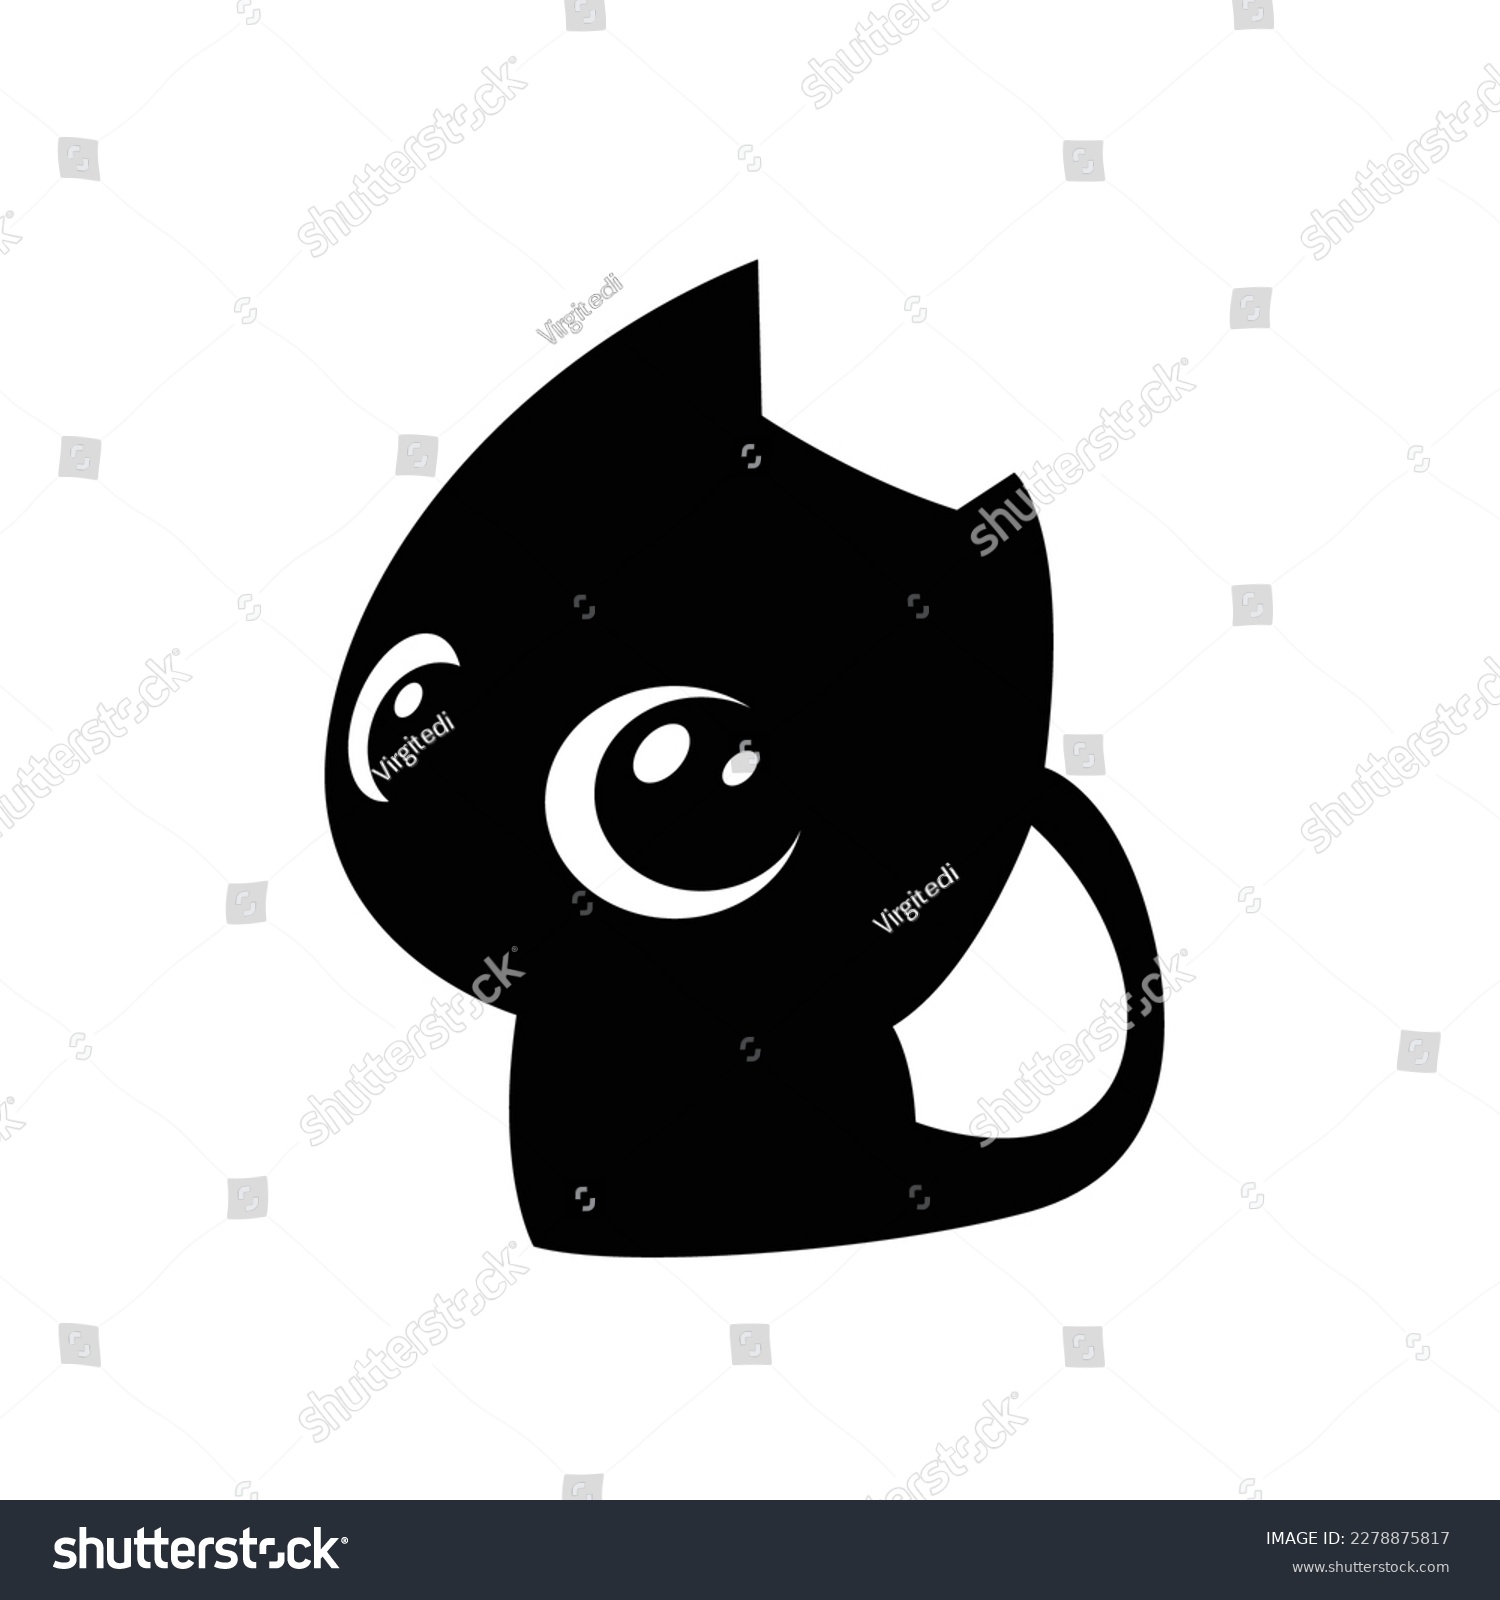 SVG of Cat silhouette drawing illustration icon svg